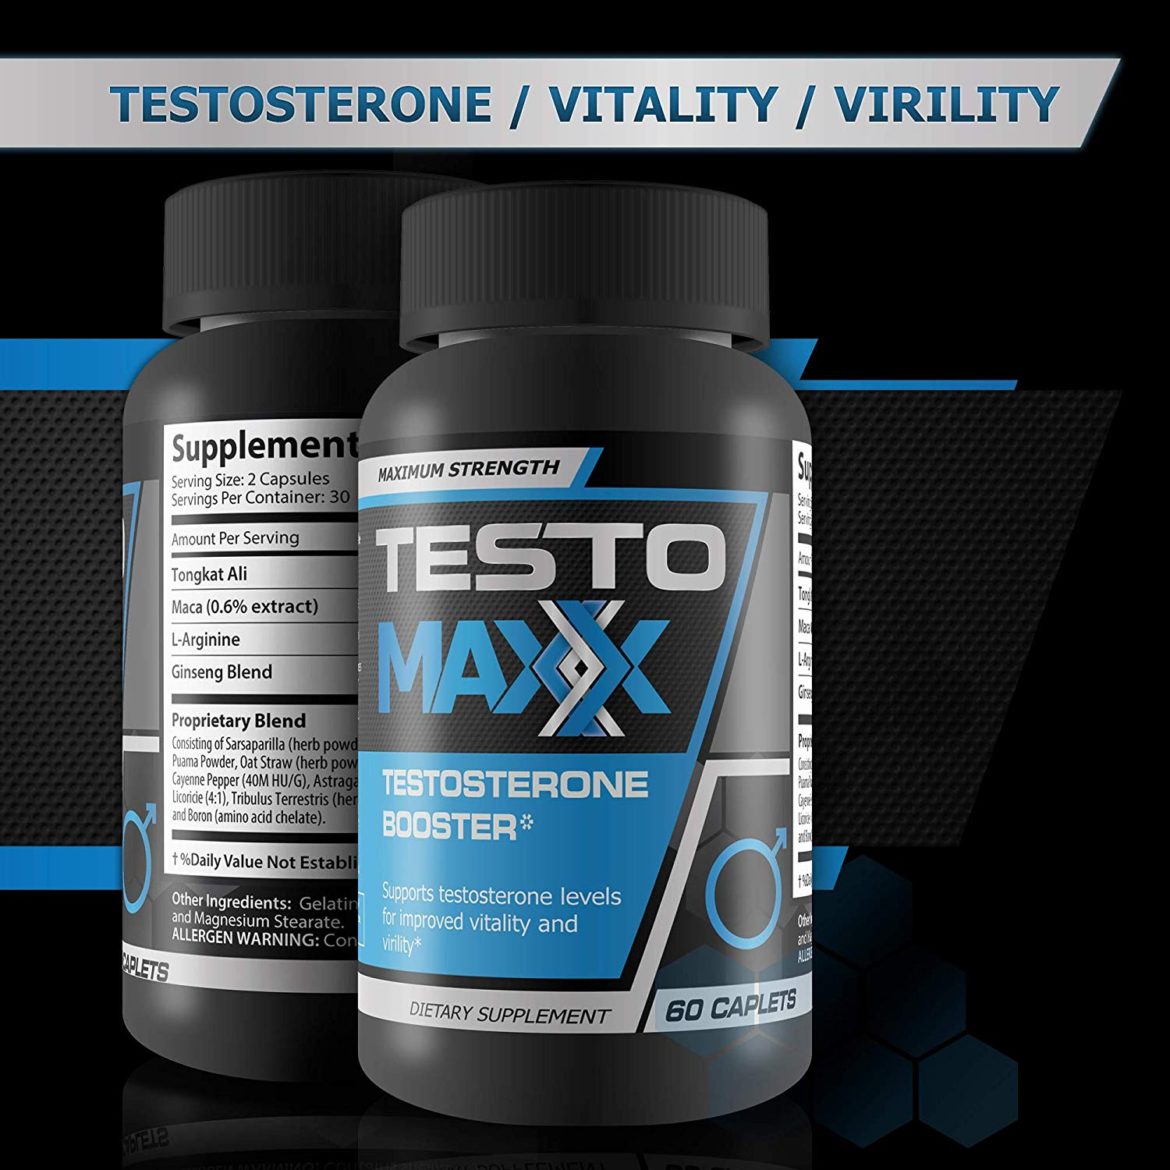 Incorporating Testosterone Booster Plants into Your Diet